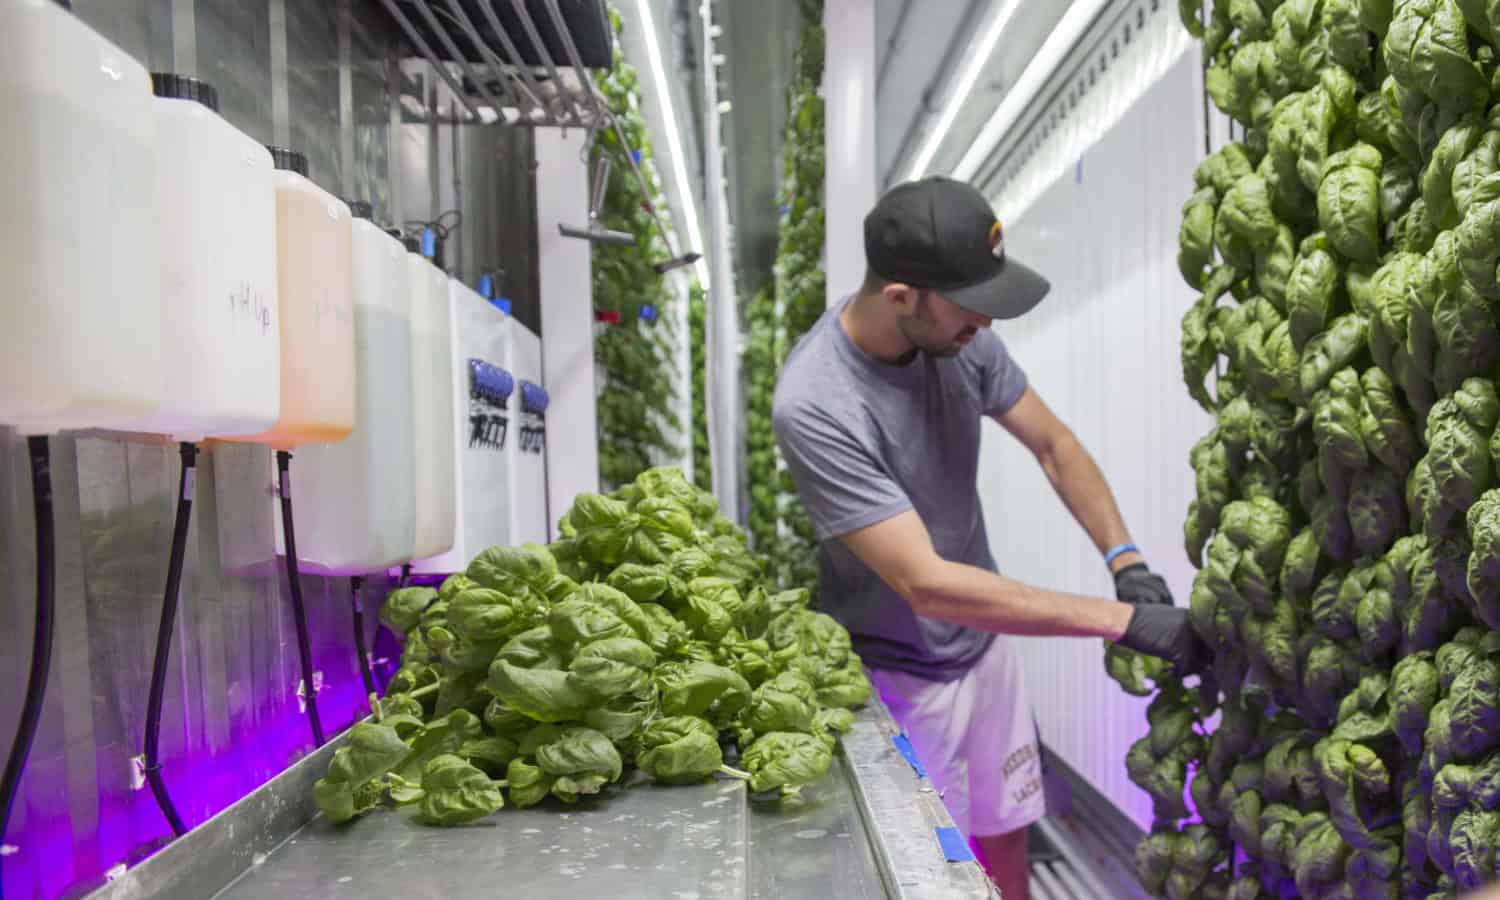 Square Roots, a high-tech indoor farming accelerator in the heart of Brooklyn, provides fresh, sustainable produce twelve months a year.